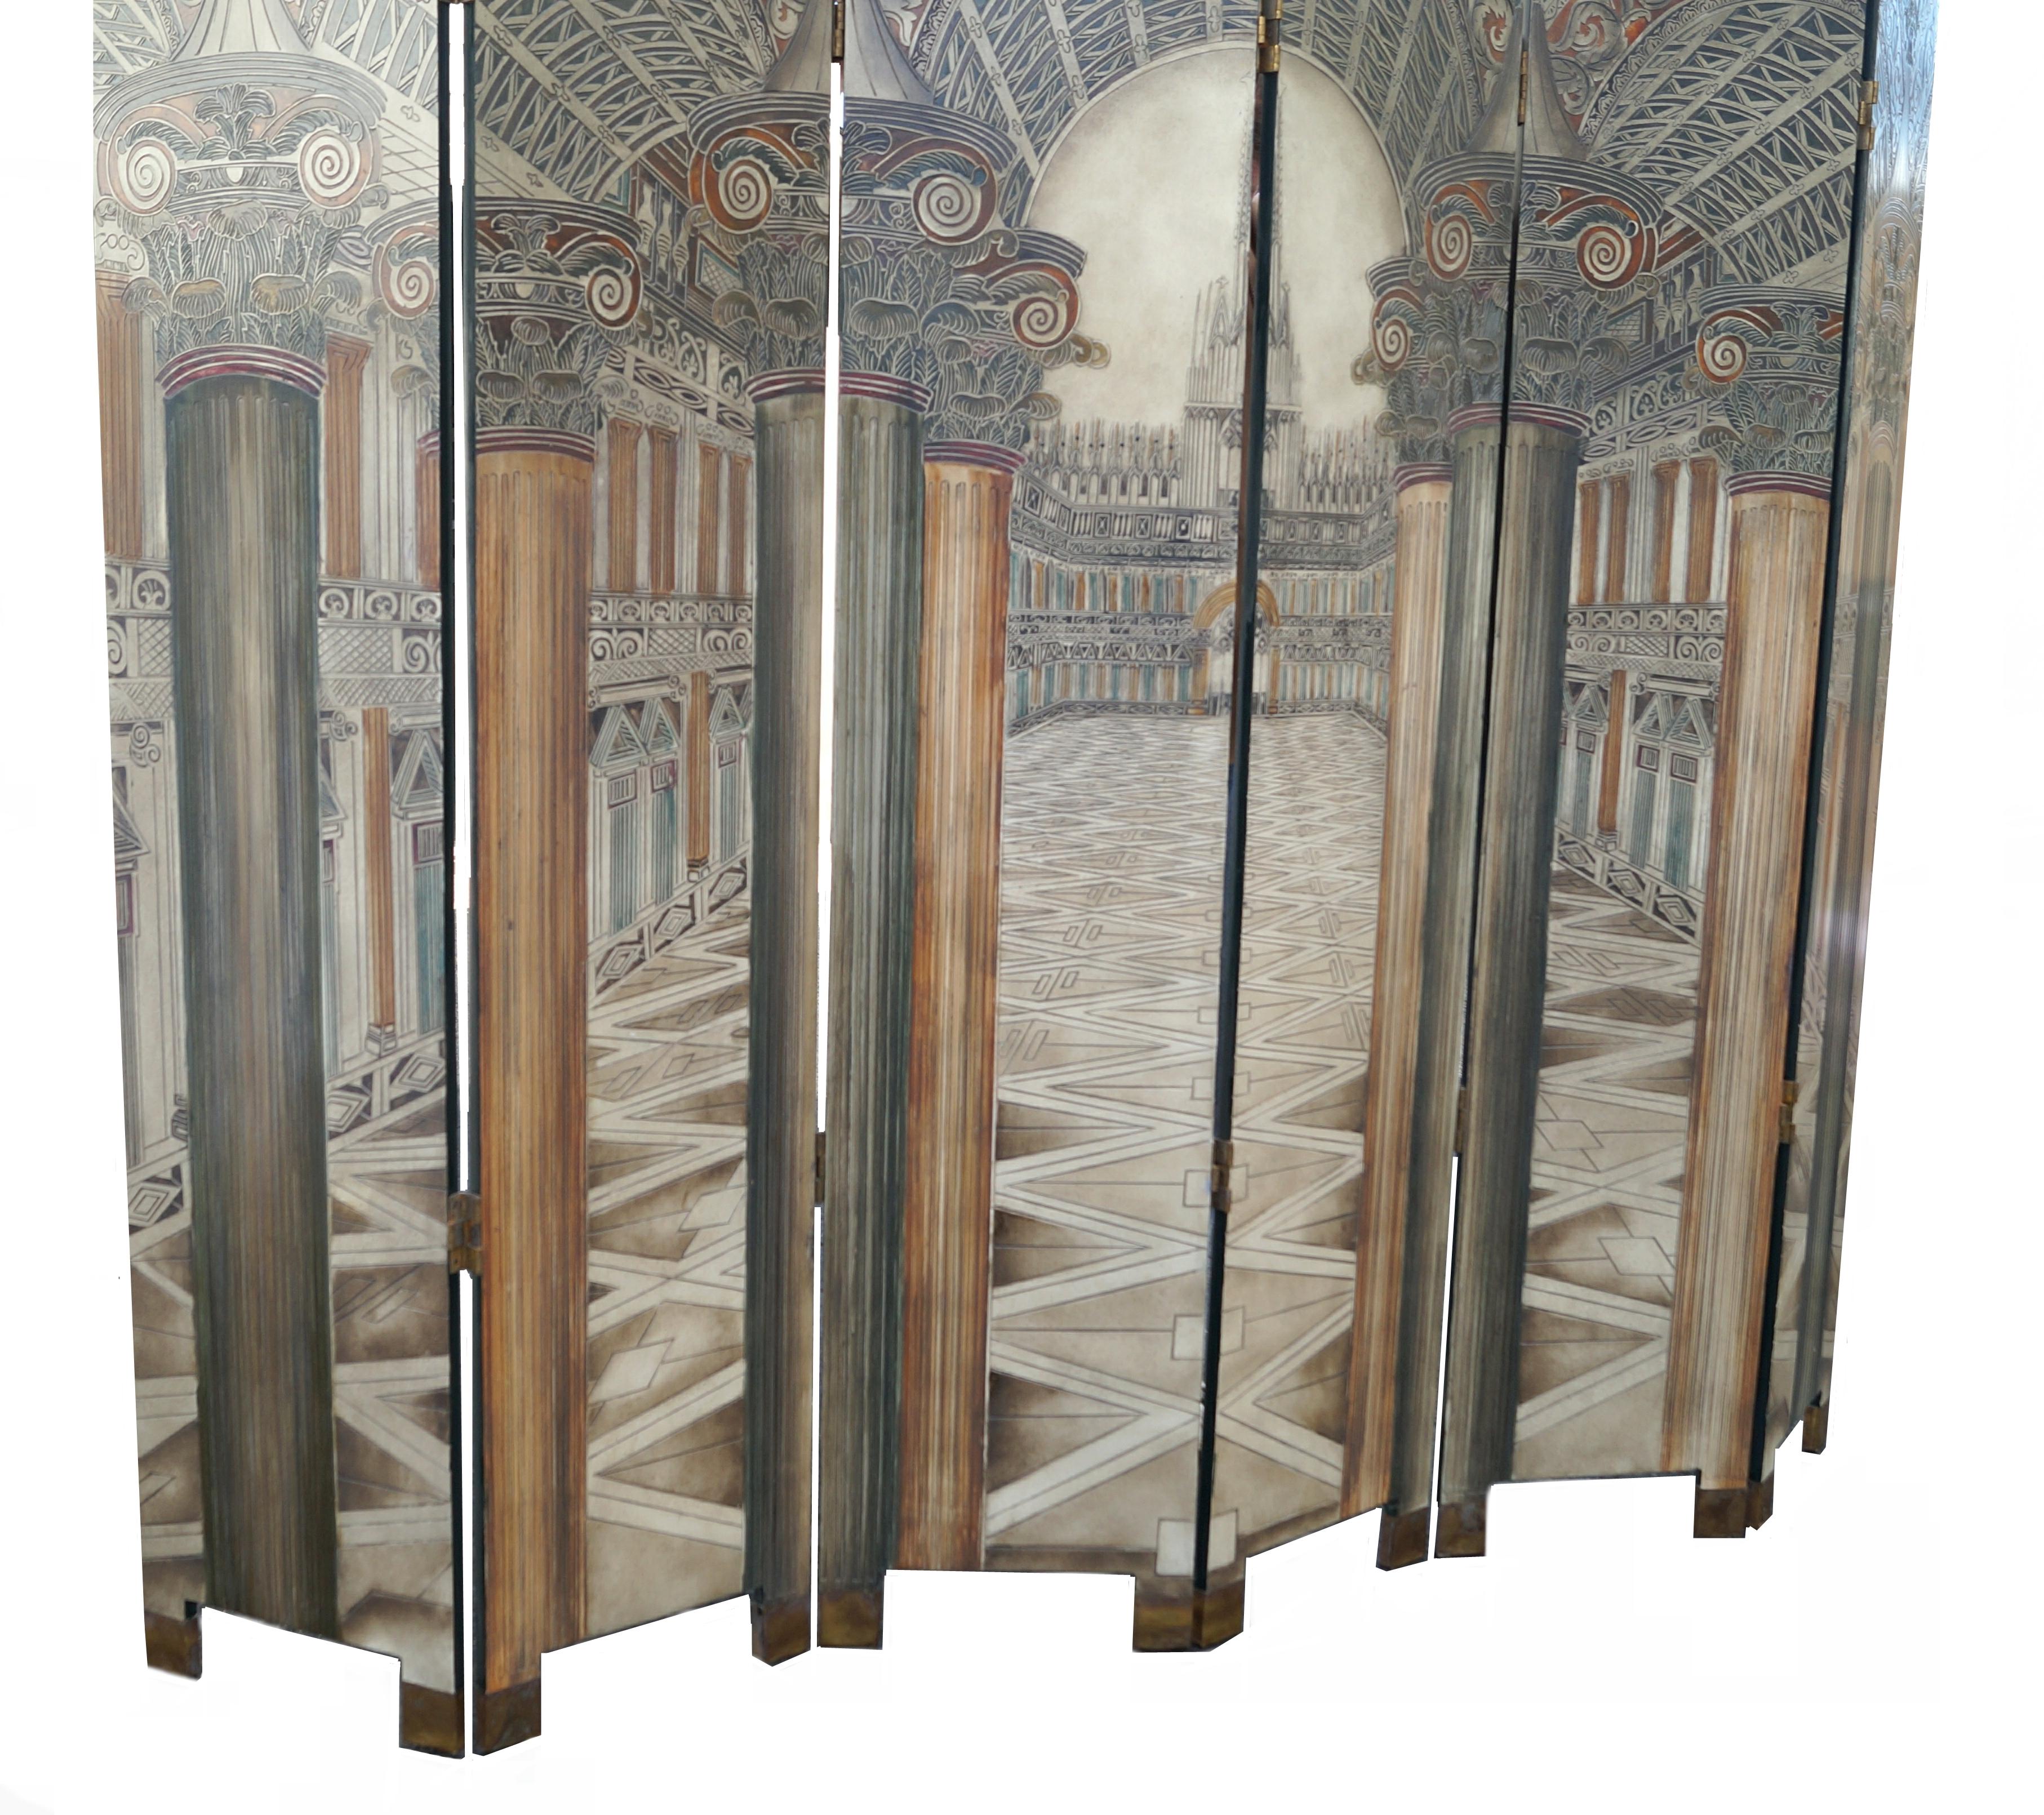 Modern Piero Fornasetti Style 6 Panel Architectural Privacy Screen Room Divider For Sale